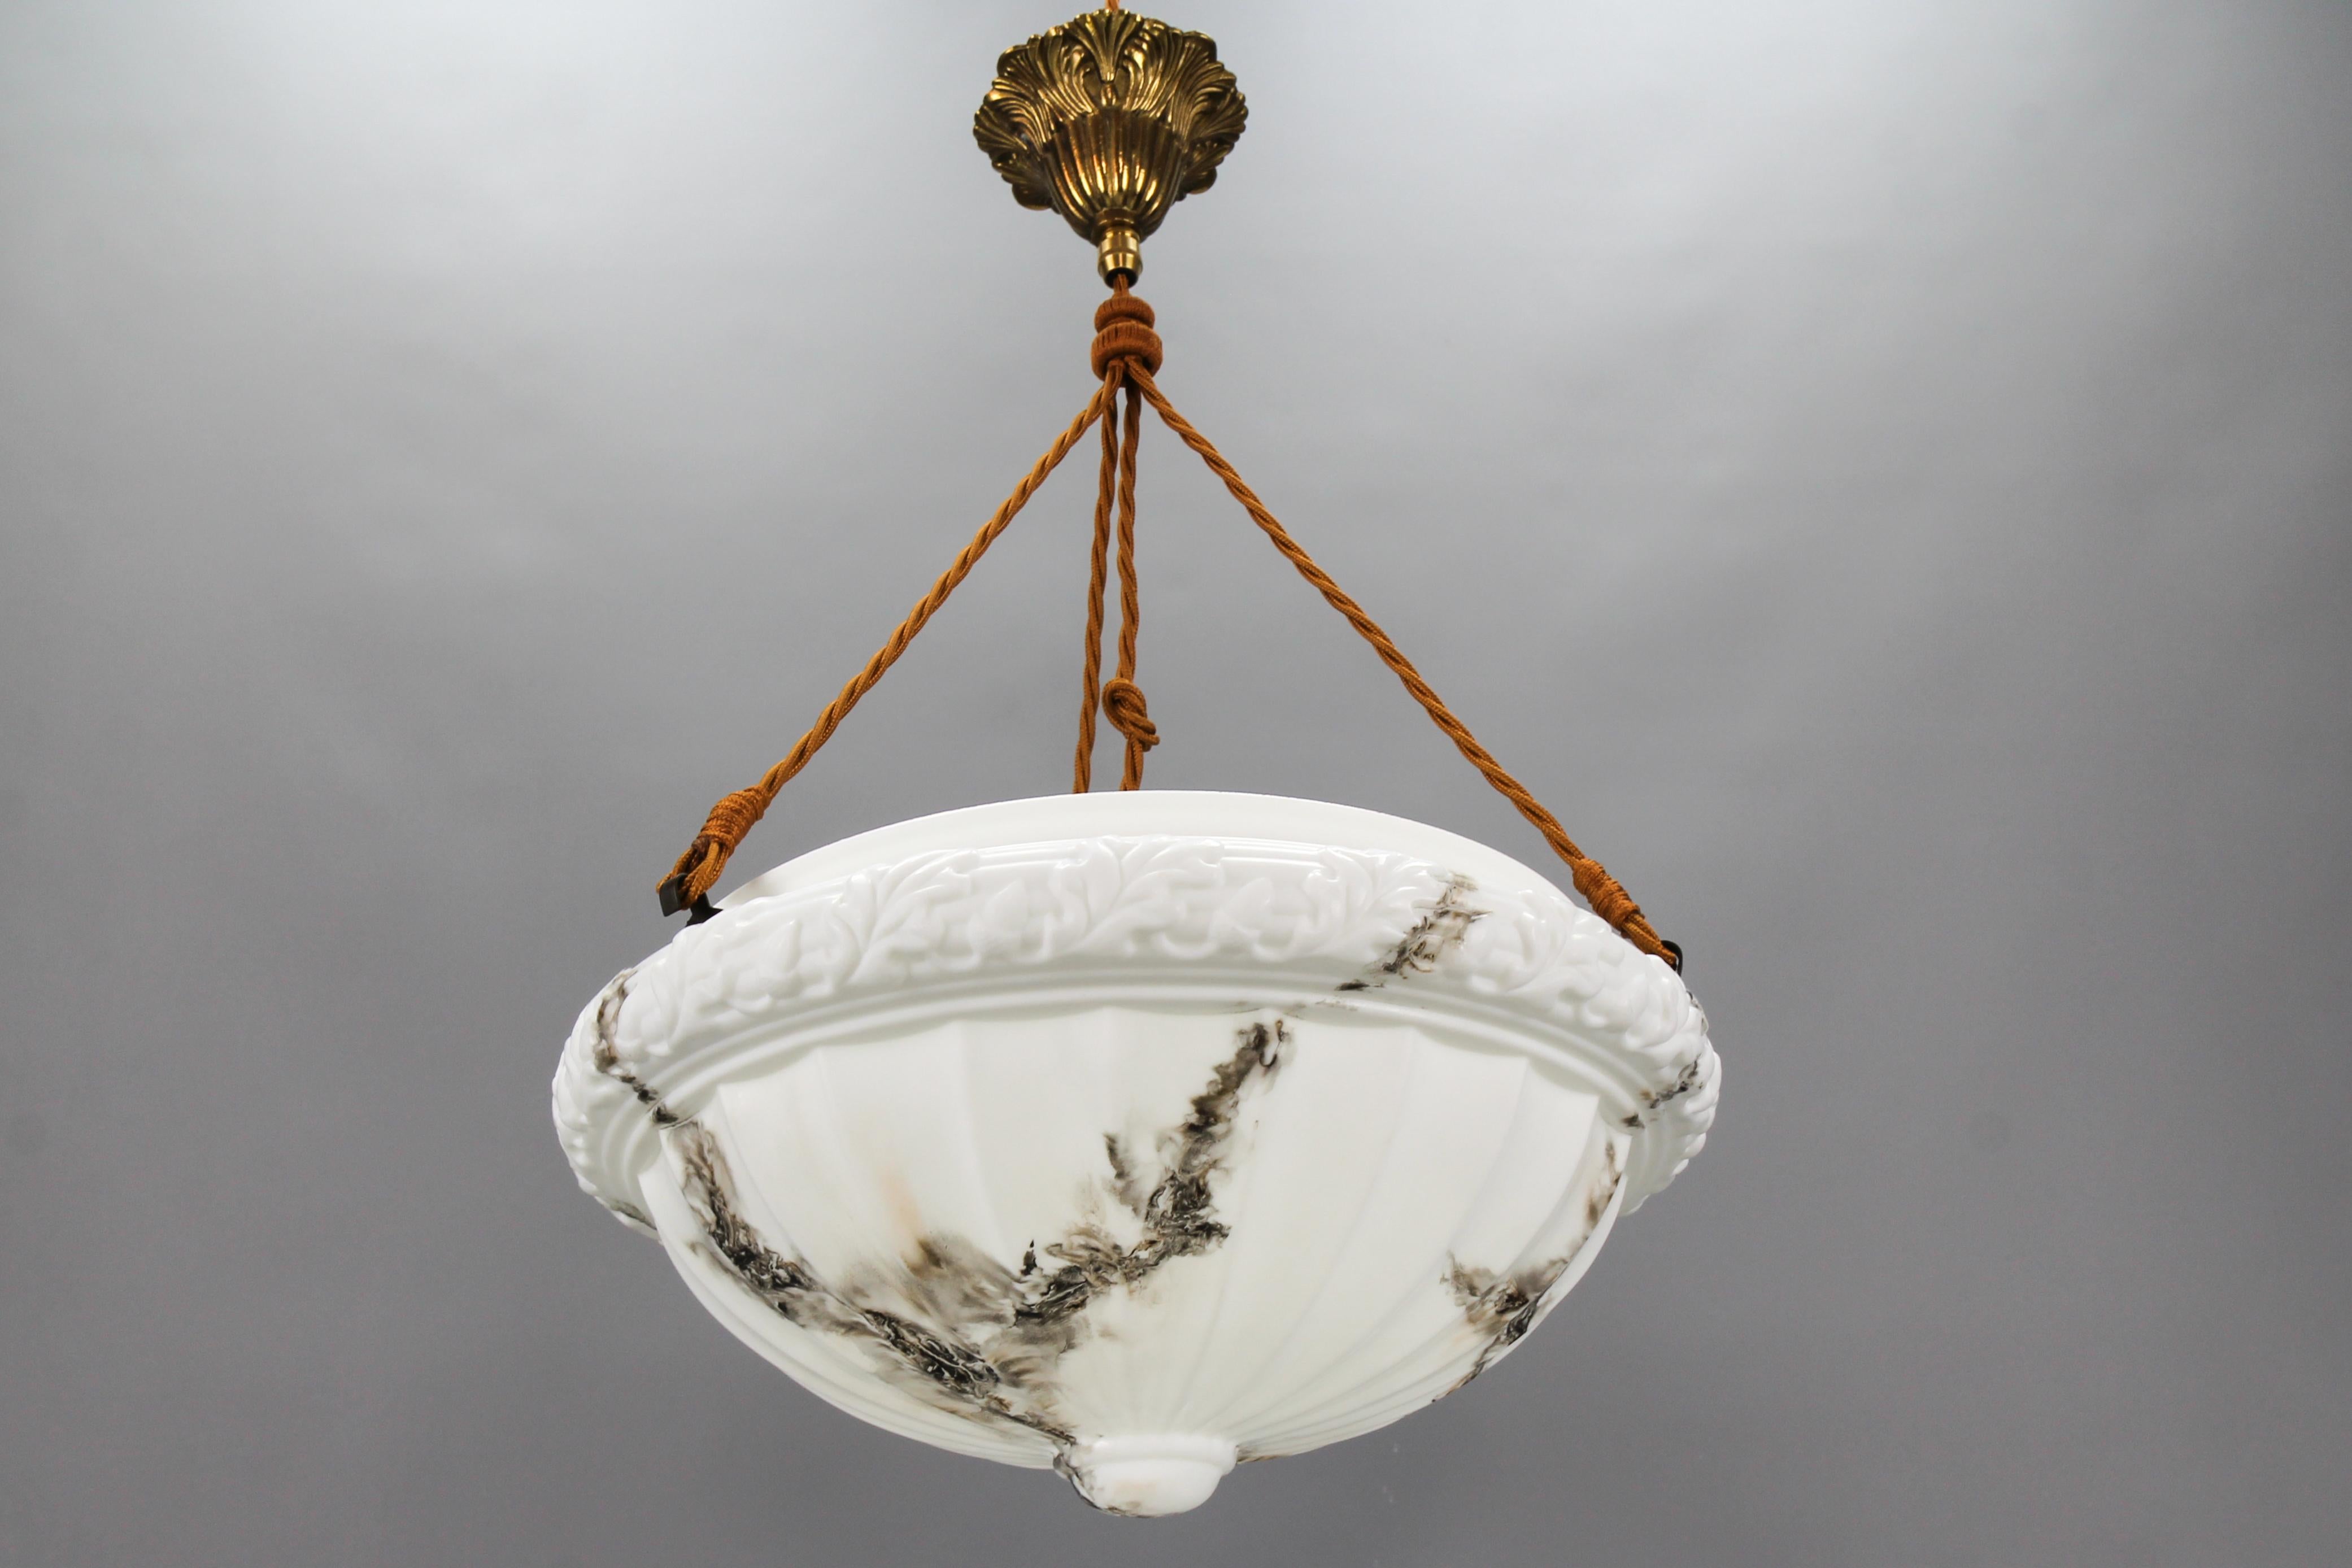 An Art Deco style marbled milk glass and brass pendant light fixture from circa the 1950s, France.
This beautifully shaped ceiling light fixture features an alabaster effect milk glass lampshade with a relief design – a pattern of acorns and oak